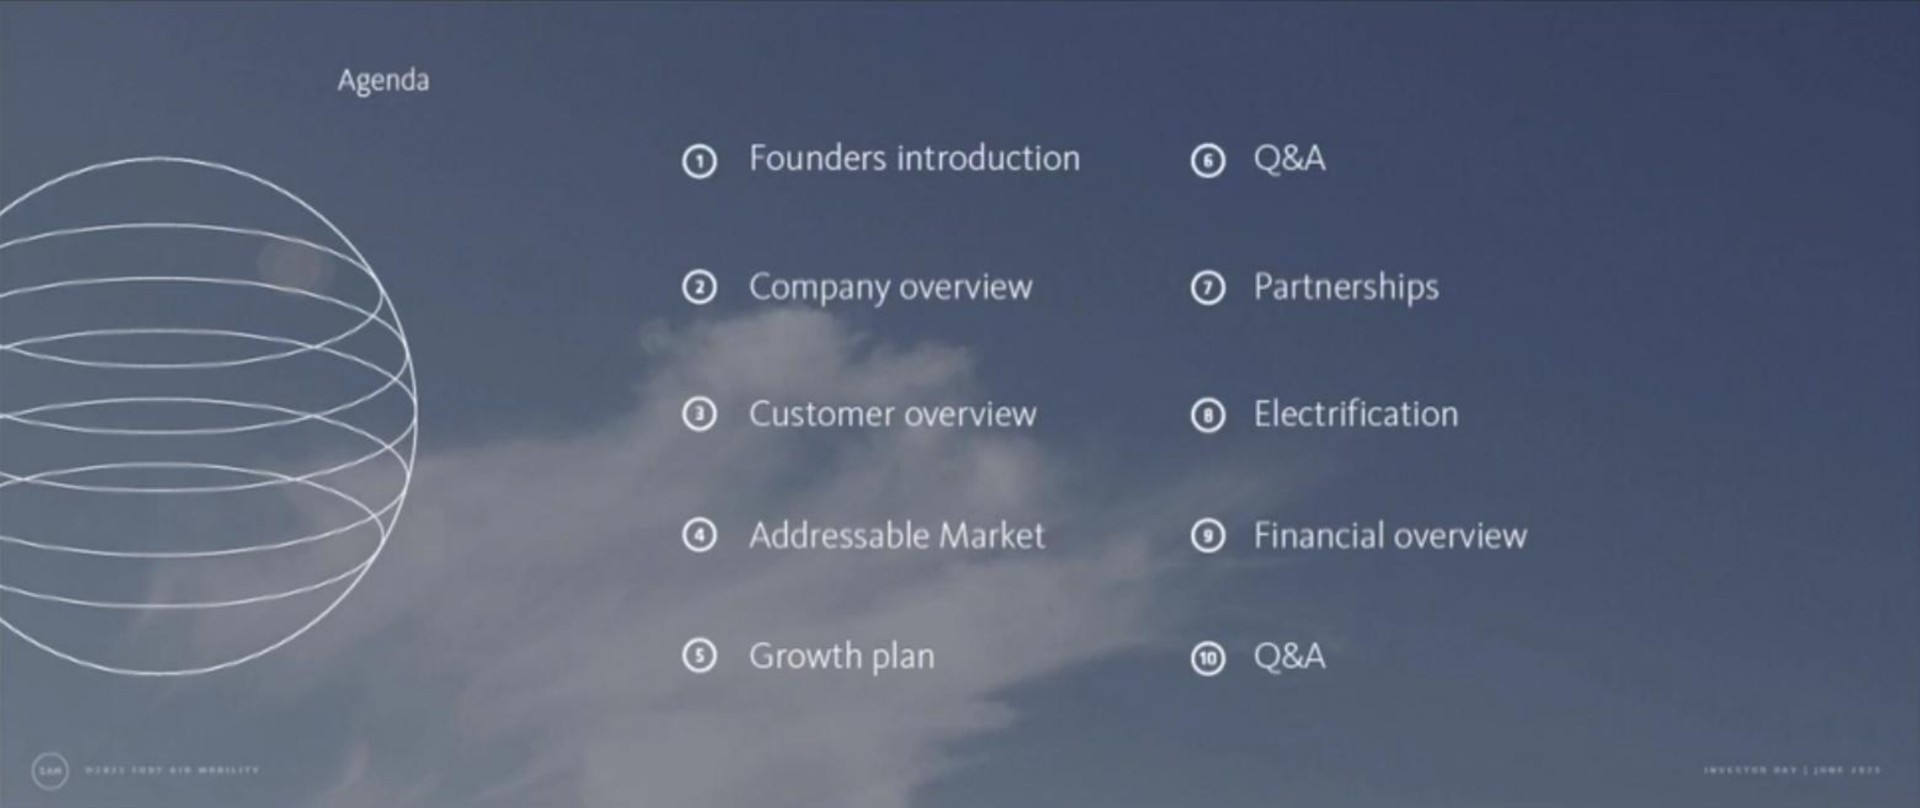 agenda founders introduction a company overview partnerships electrification financial overview | Surf Air